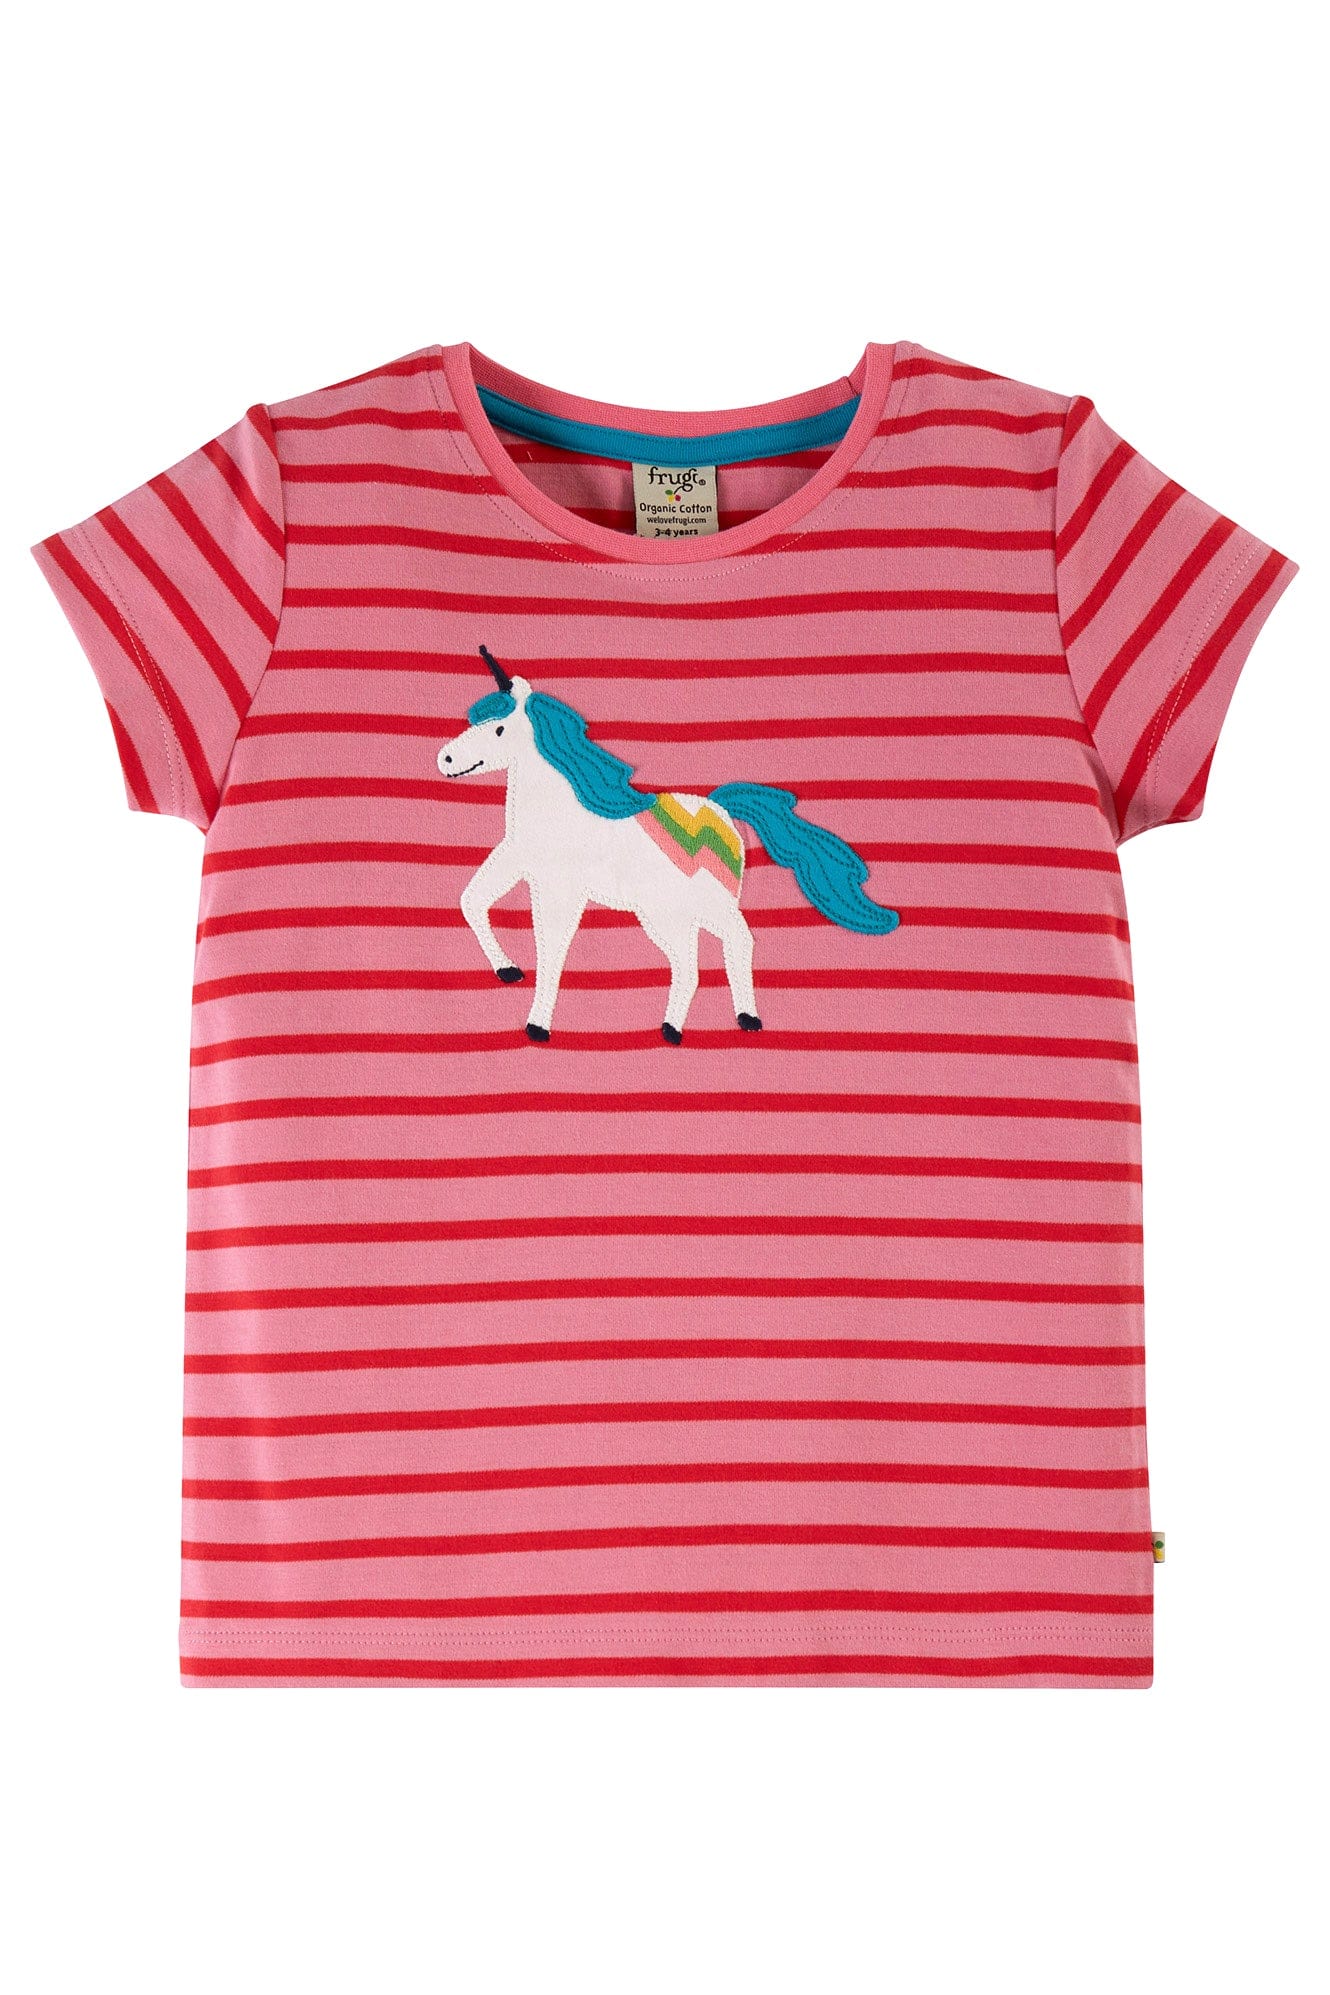 Unicorn Camille Applique Tee [only 18 to 24 Months left]